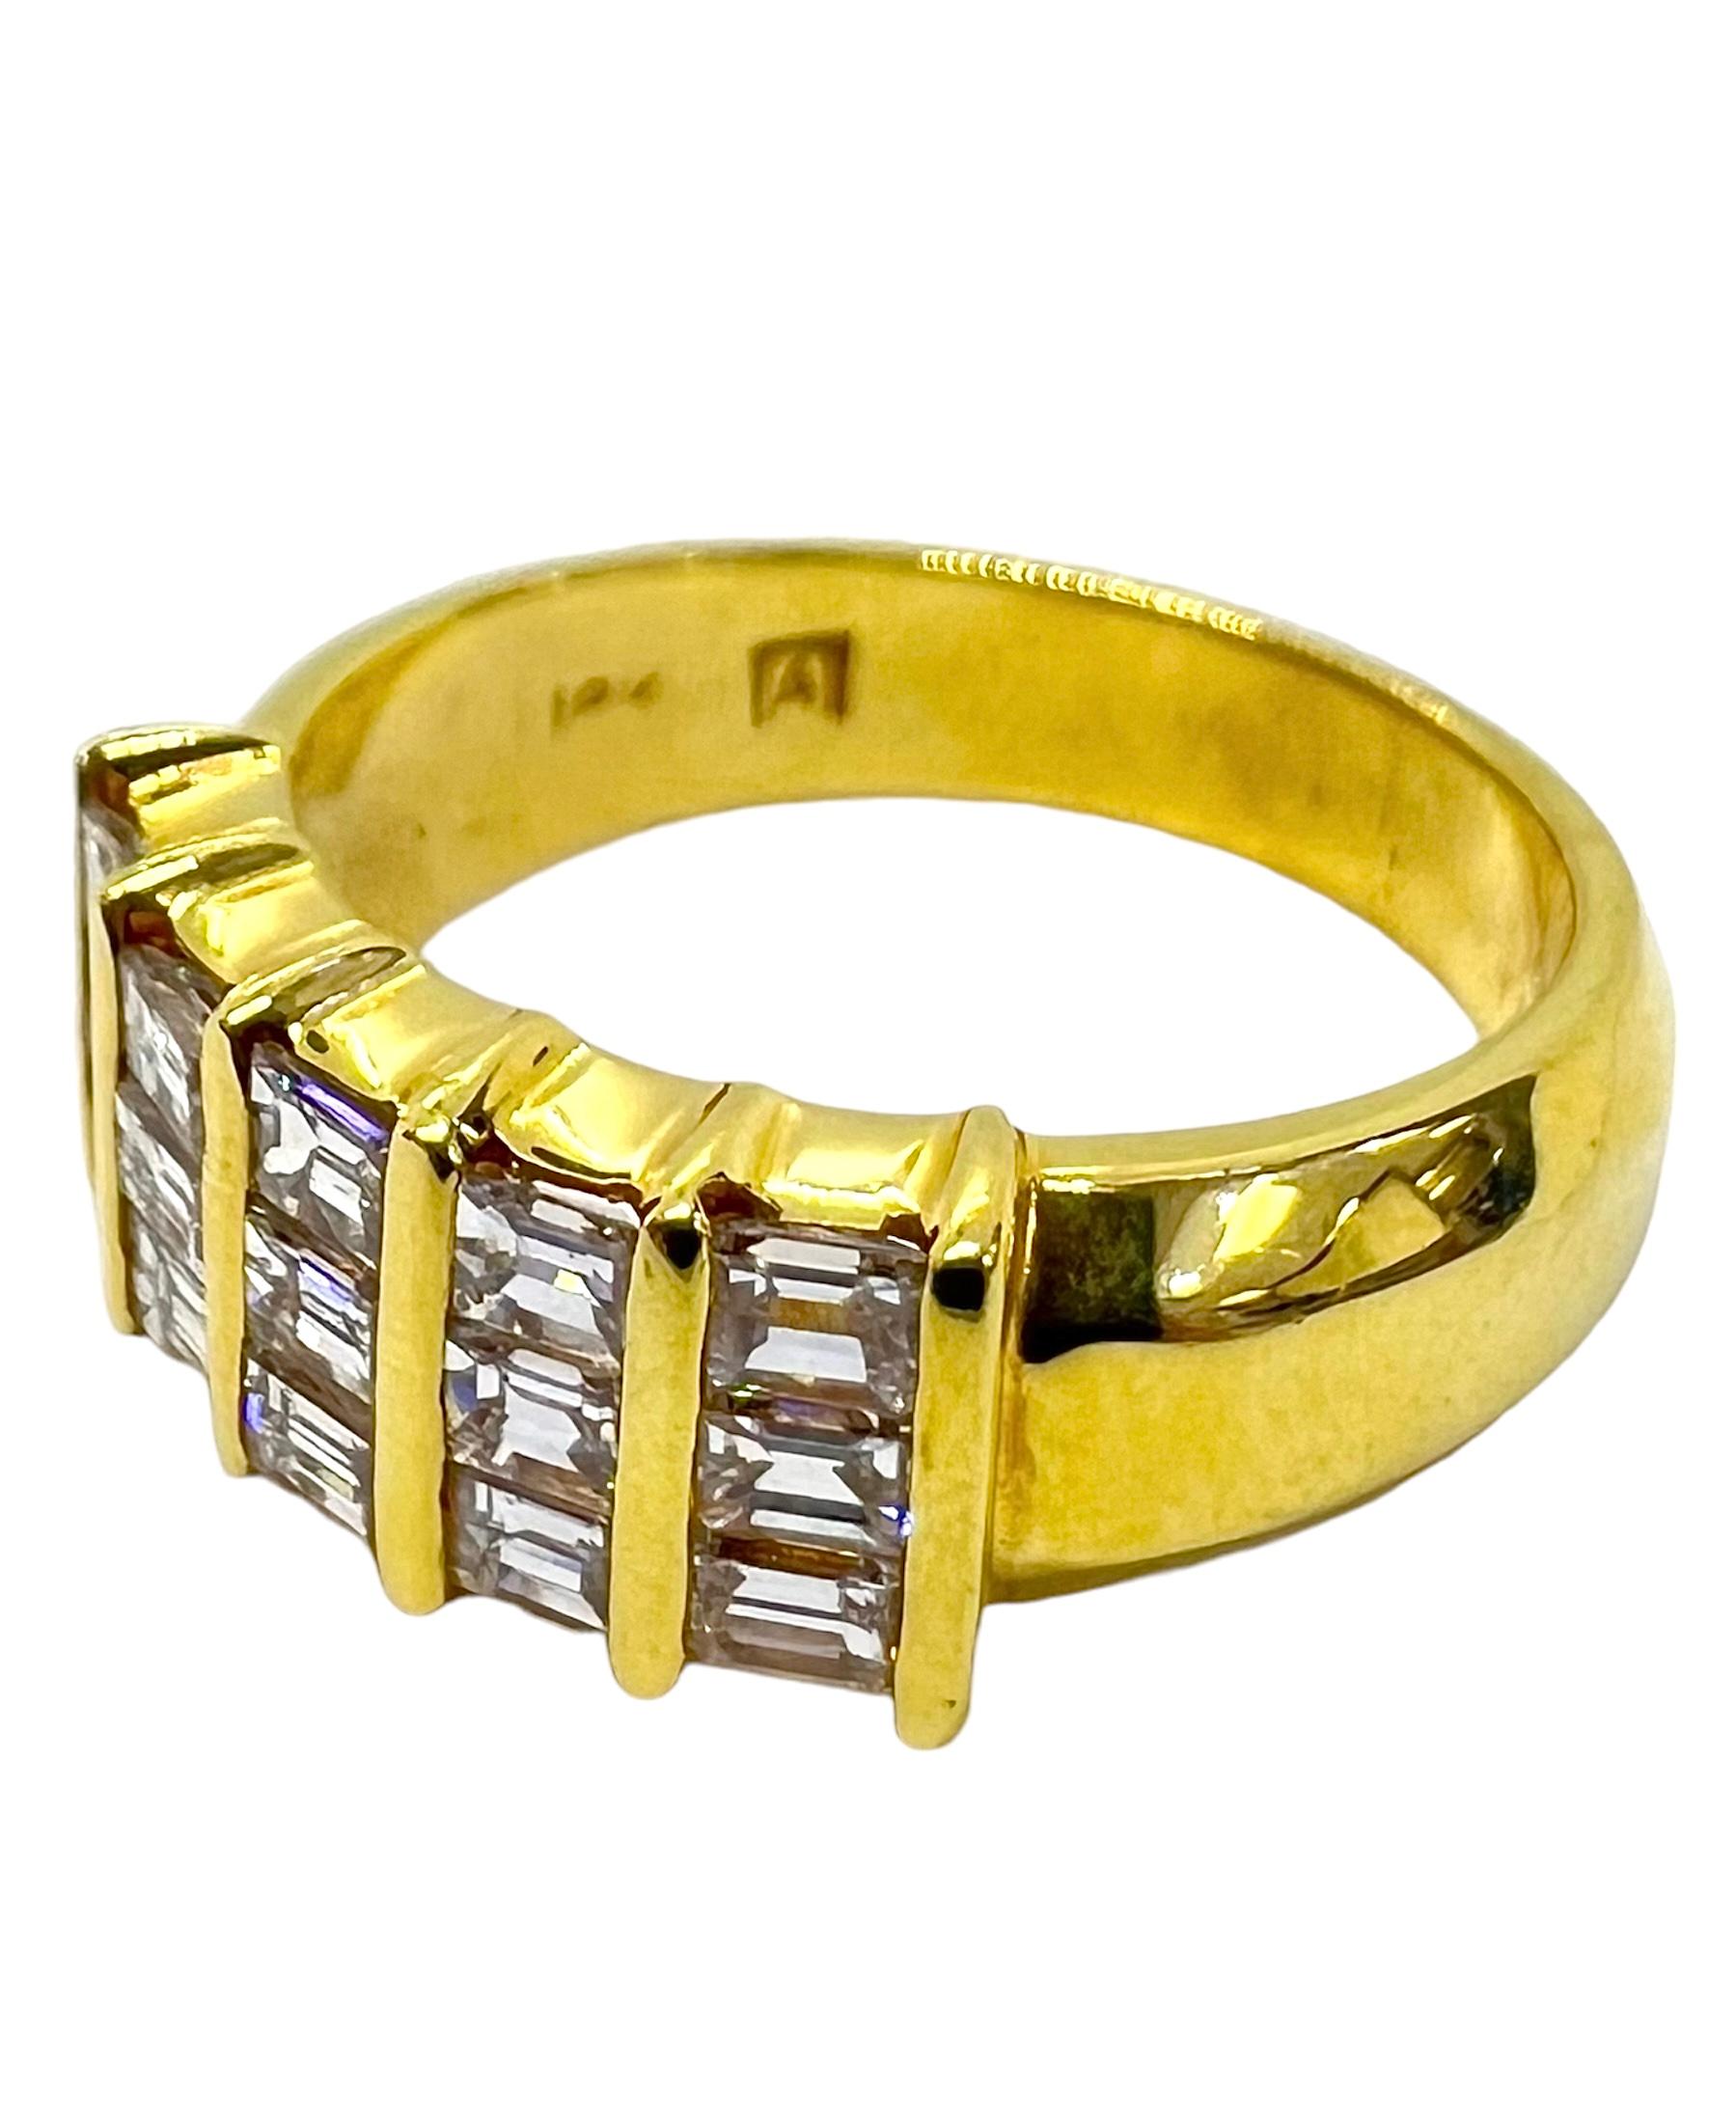 18K yellow gold ring with emerald cut diamonds.

Sophia D by Joseph Dardashti LTD has been known worldwide for 35 years and are inspired by classic Art Deco design that merges with modern manufacturing techniques.